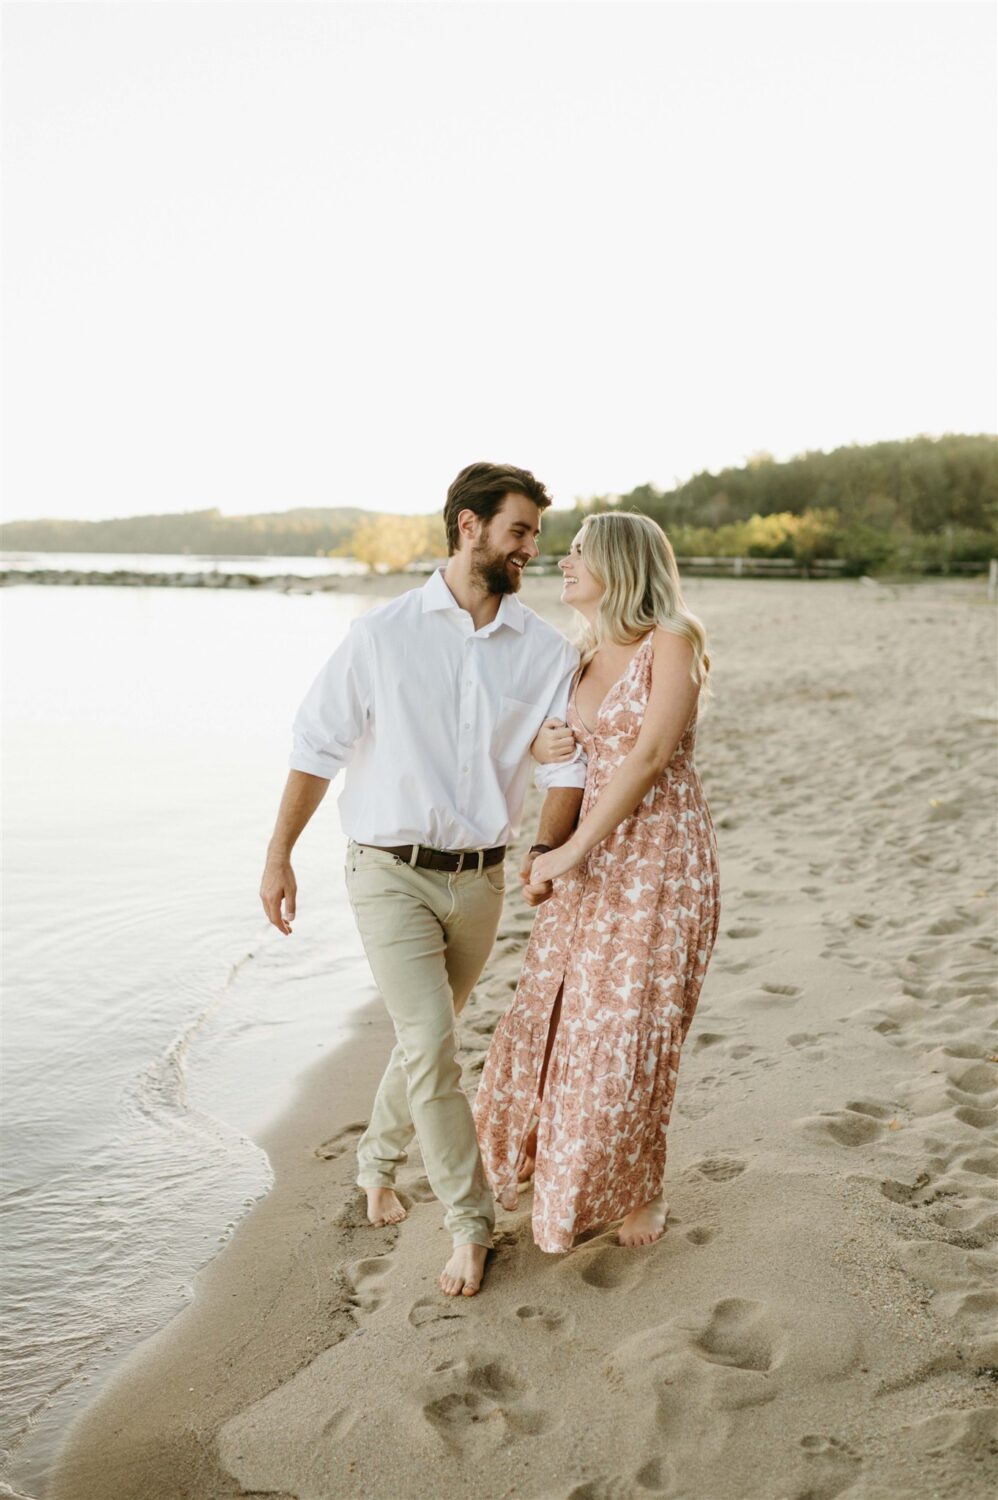 Leesylvania State Park beach inspired engagement session summer bride and groom